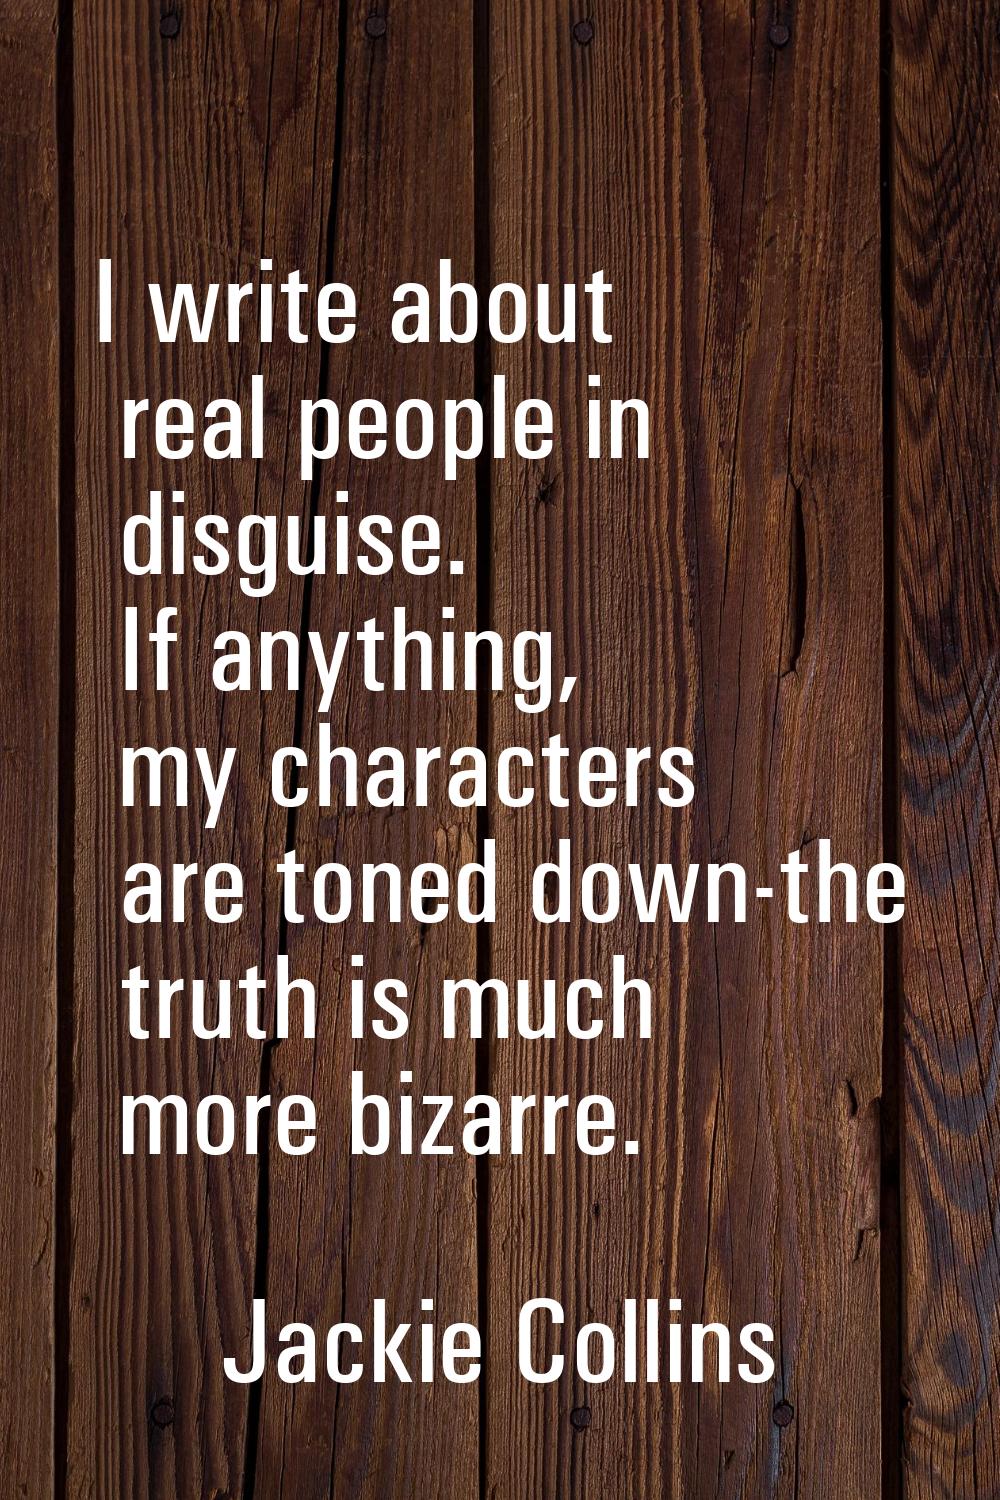 I write about real people in disguise. If anything, my characters are toned down-the truth is much 